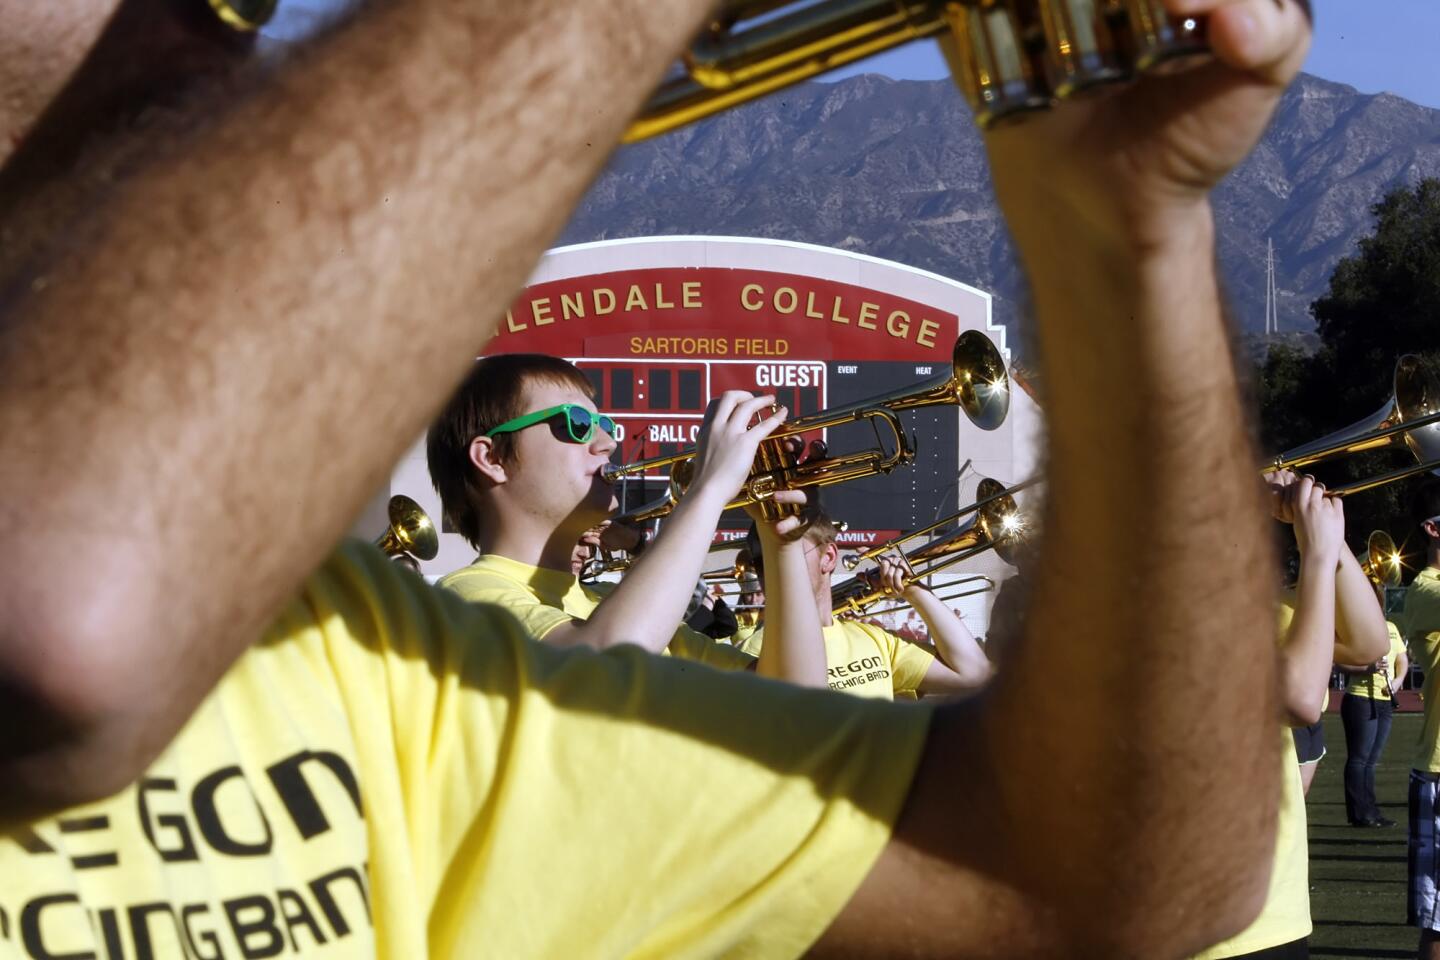 Photo Gallery: Oregon Ducks band practice at Glendale College